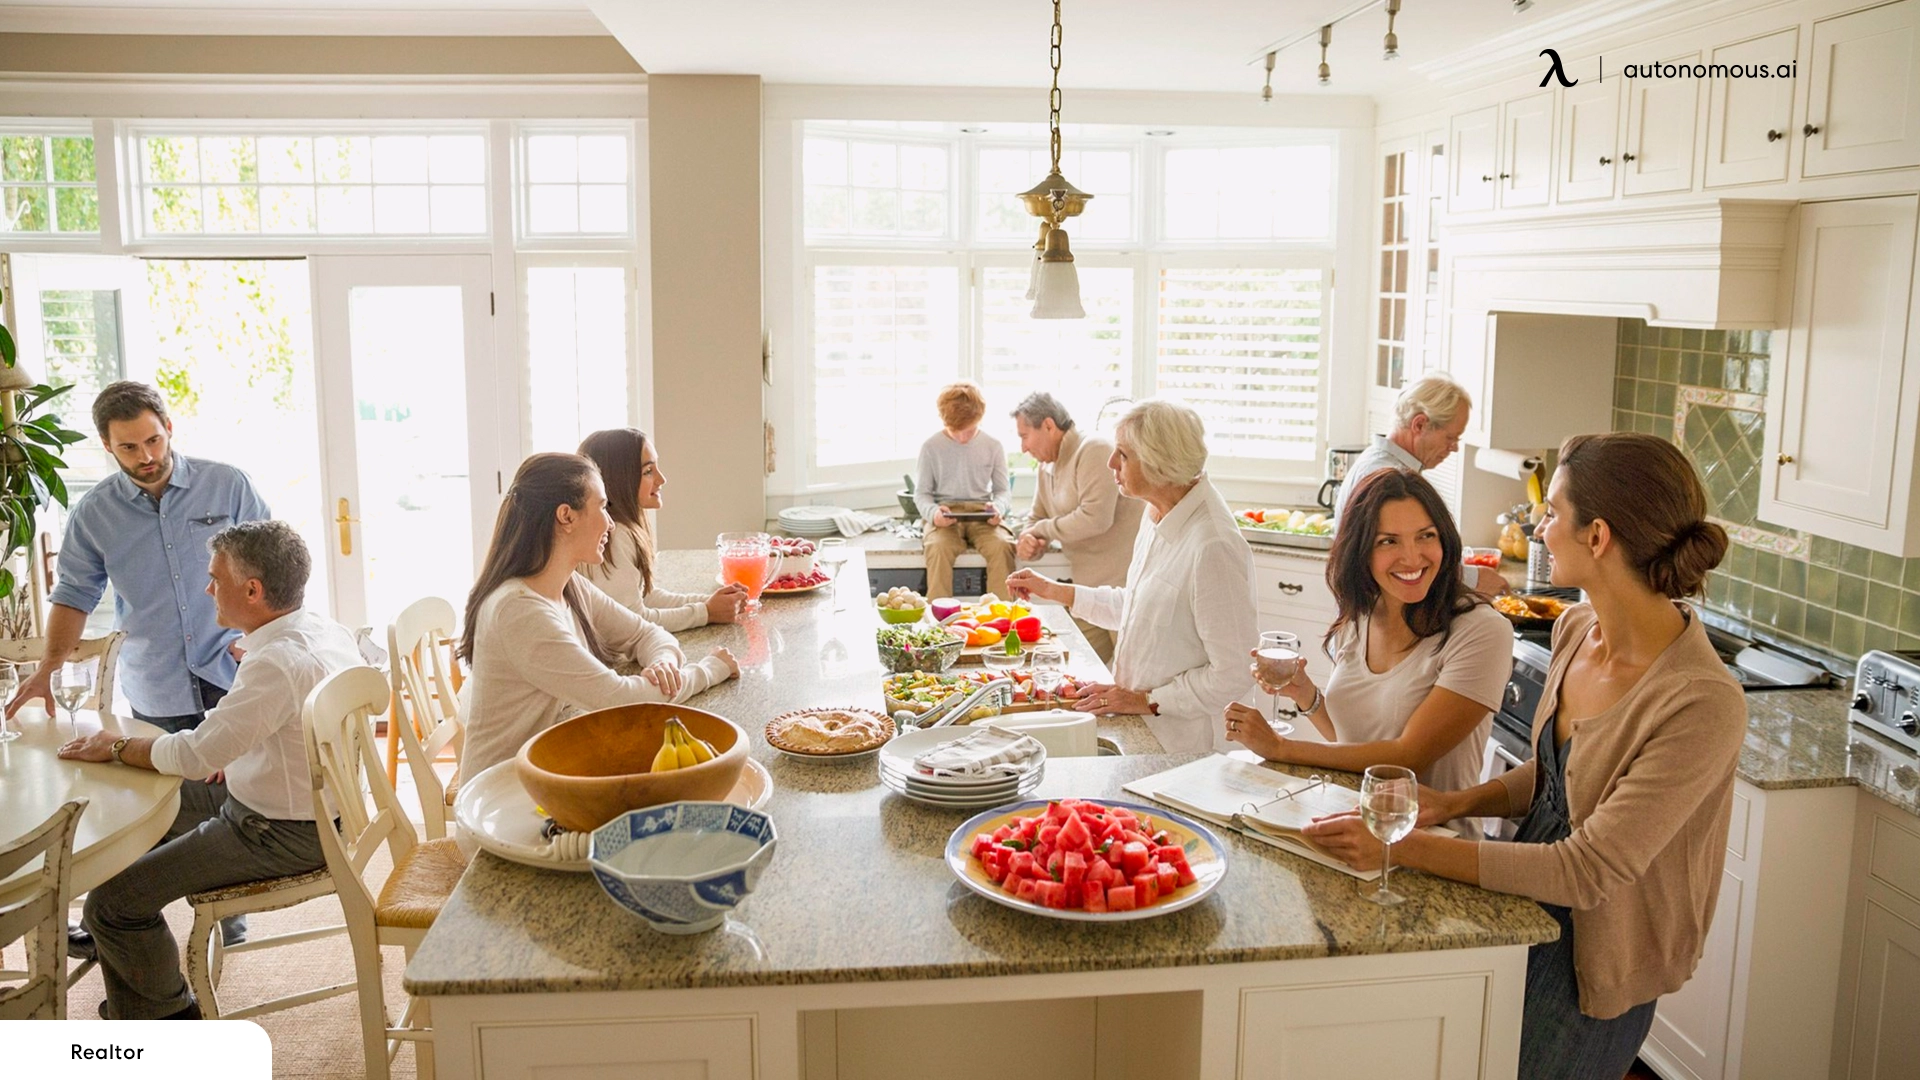 What Are the Hurdles in Multigenerational Living?